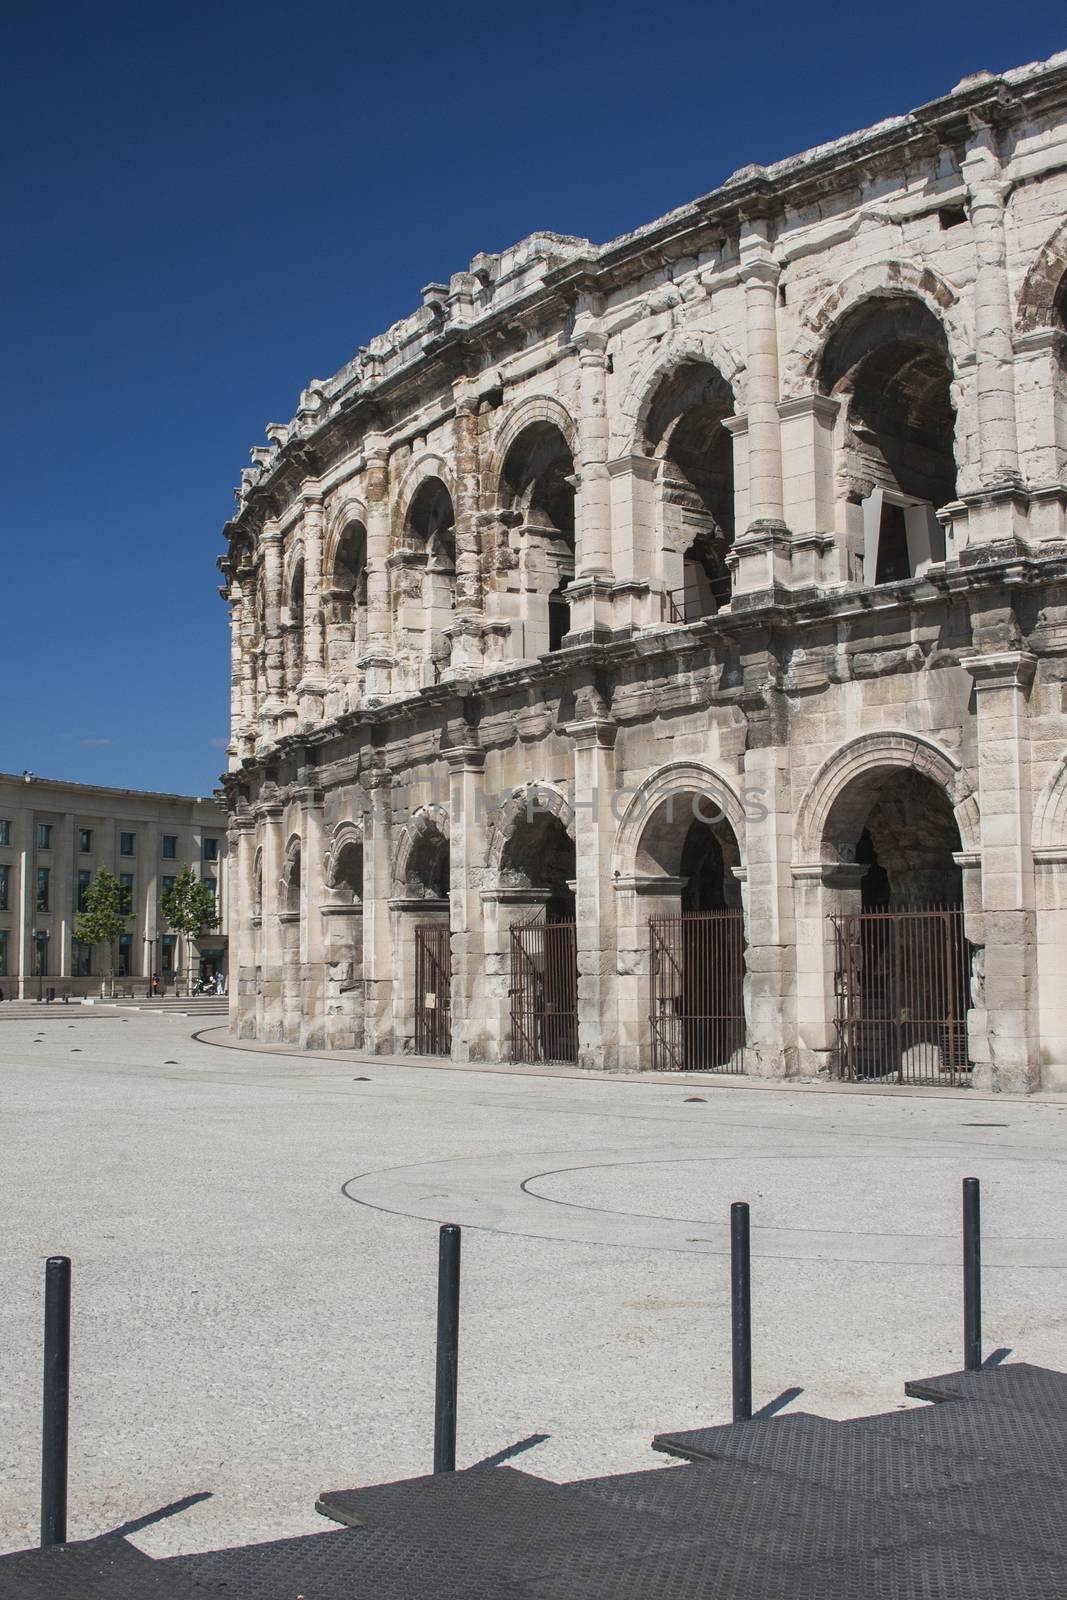 Amphitheatre in Nimes, France from Roman times

